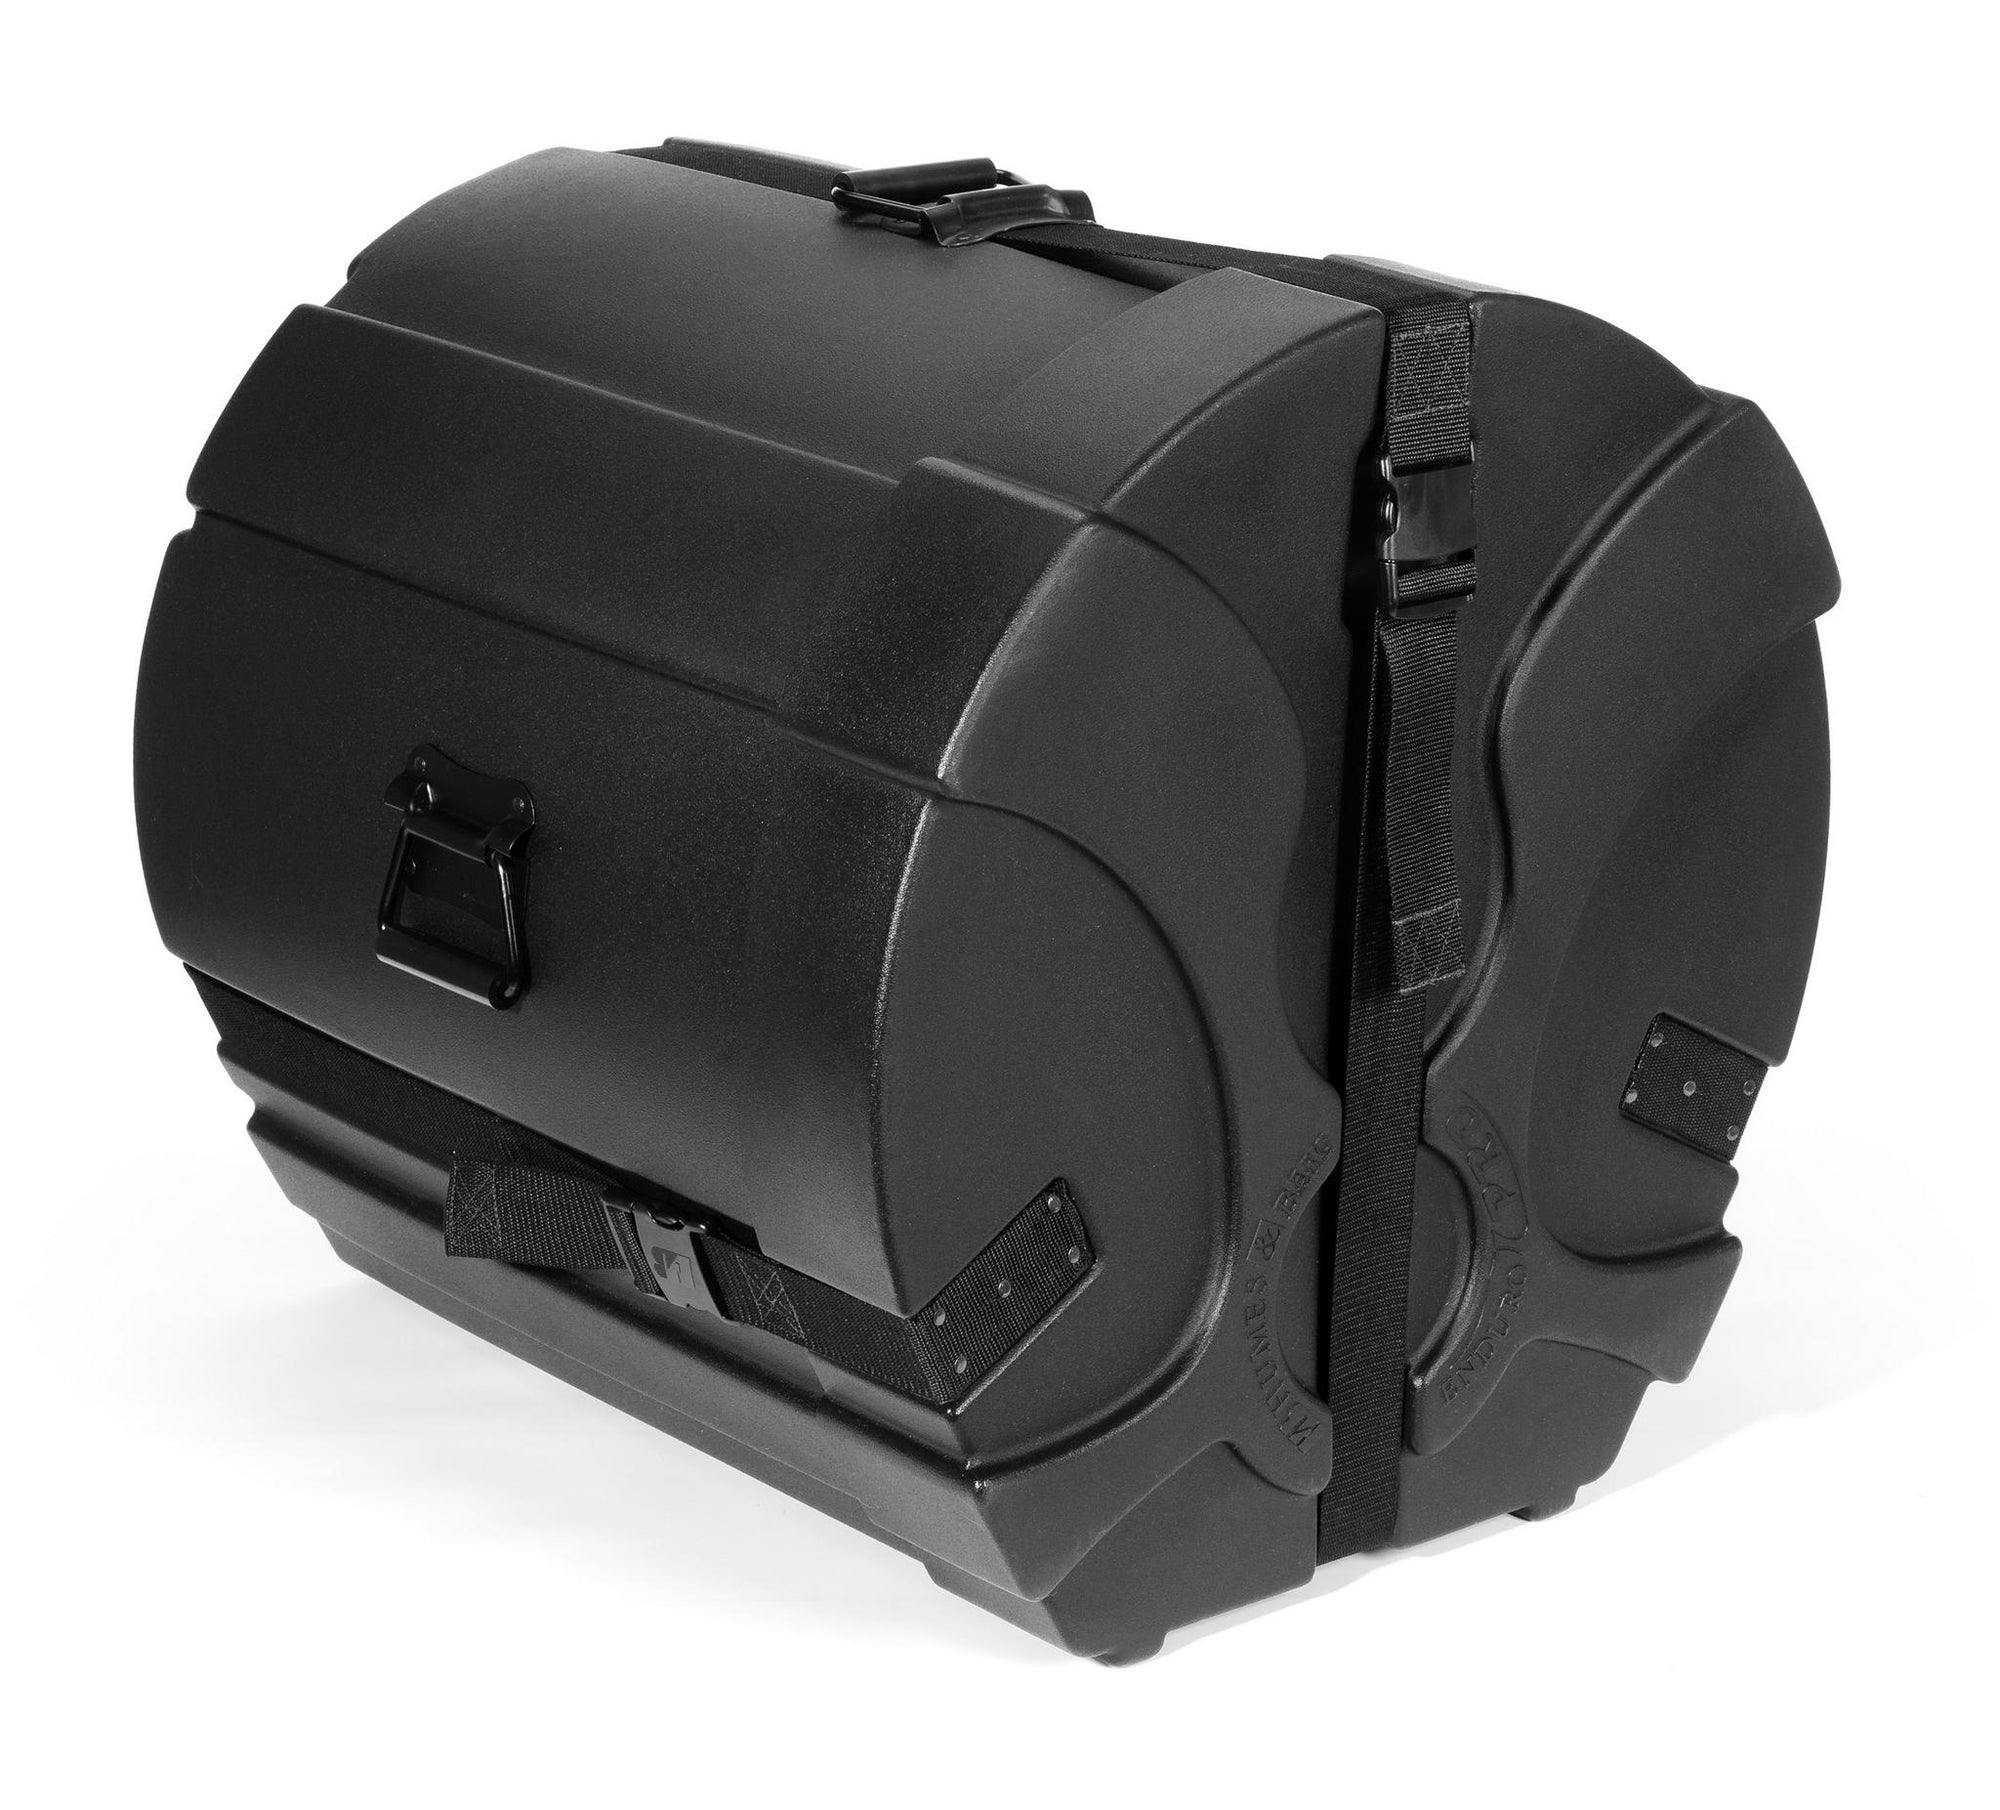 H&B Enduro Pro 8 x 22 Inches Bass Drum Case - Black with Pro Lining